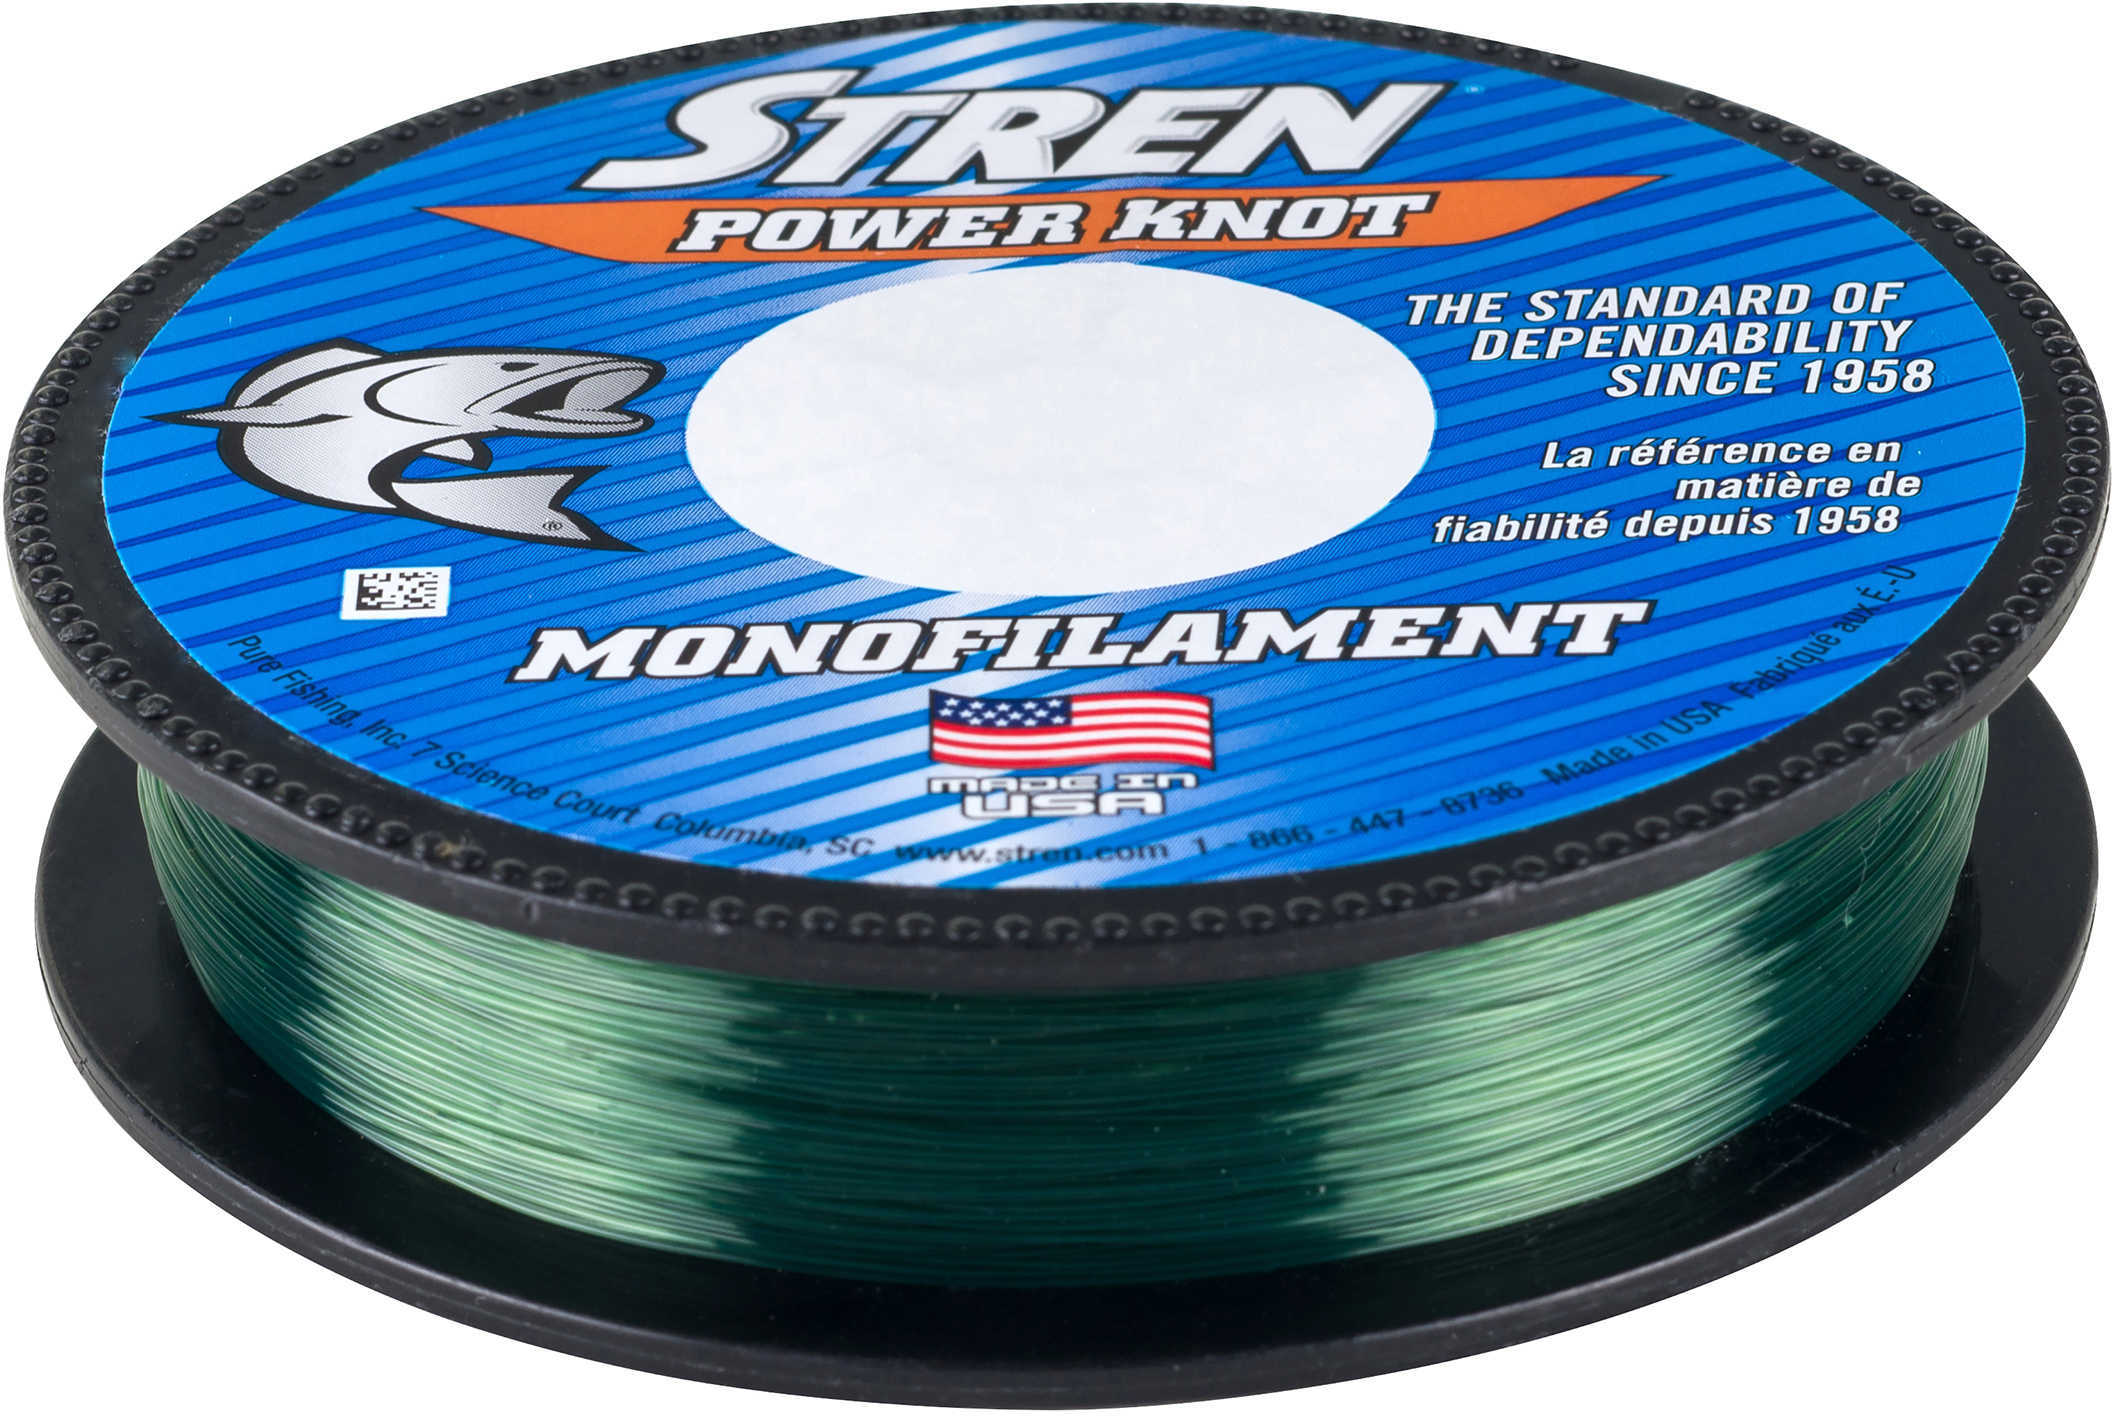 Power Knot 220 Yards , 14 lbs Strength, 0.015", Lo-Vis Green Md: 1367563